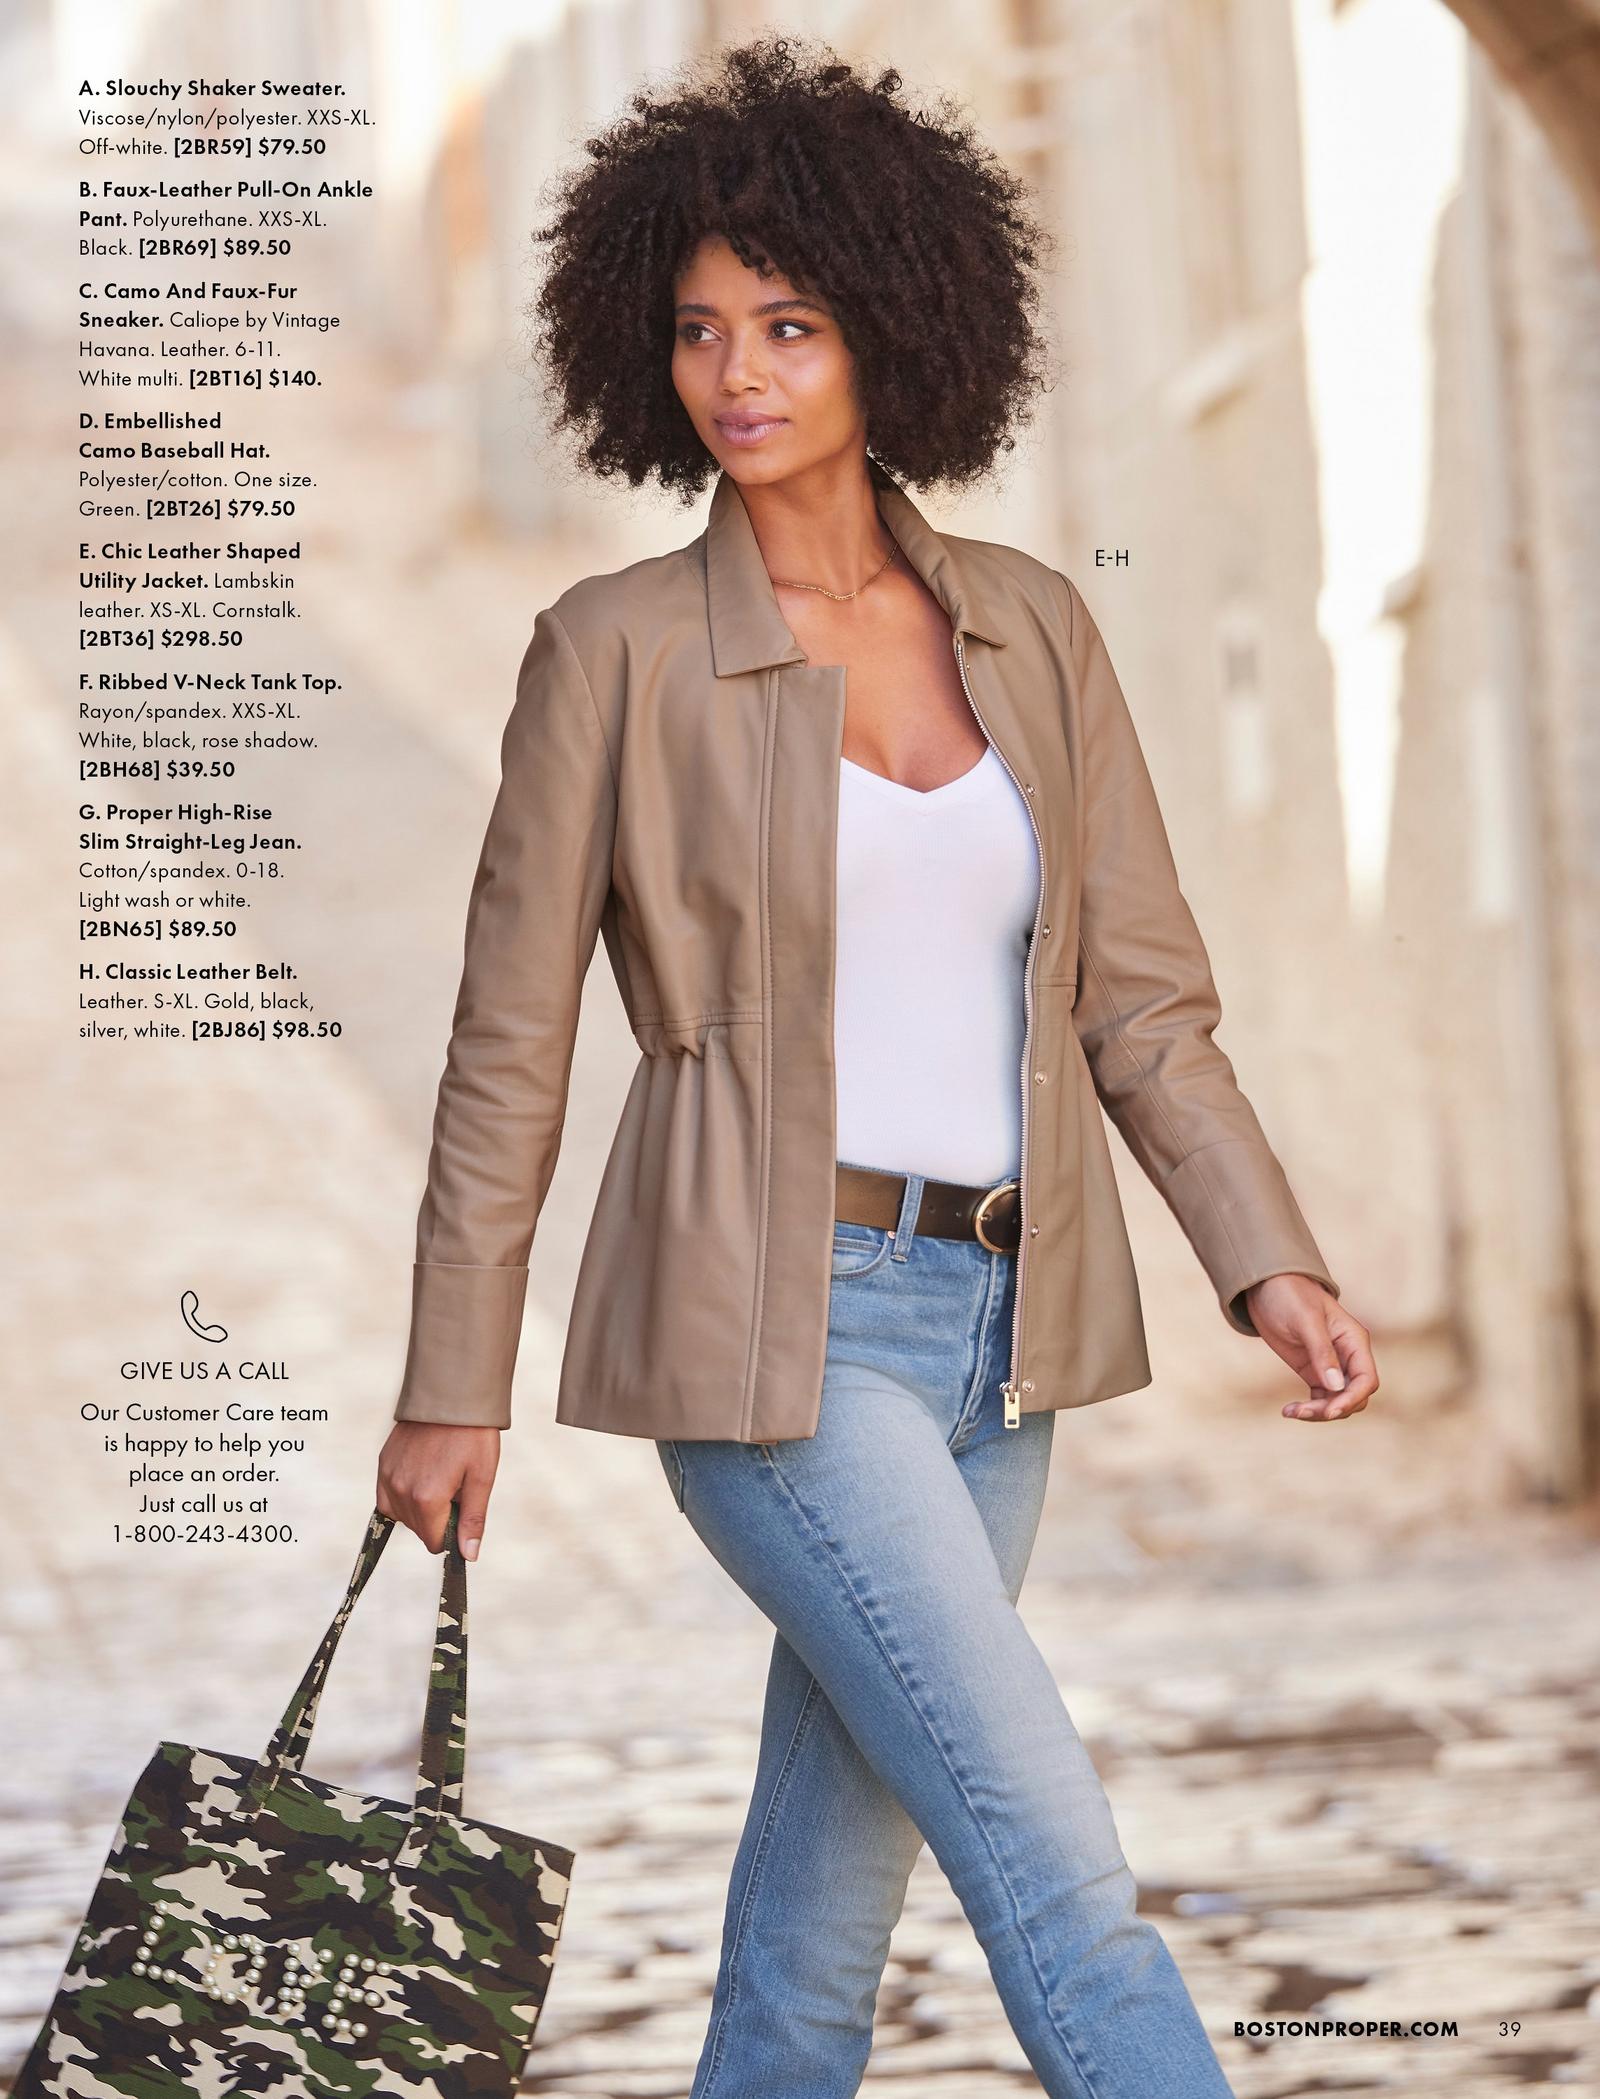 model wearing a tan leather shaped utility jacket, white v-neck top, black leather belt, jeans, and holding an embellished camo tote bag.